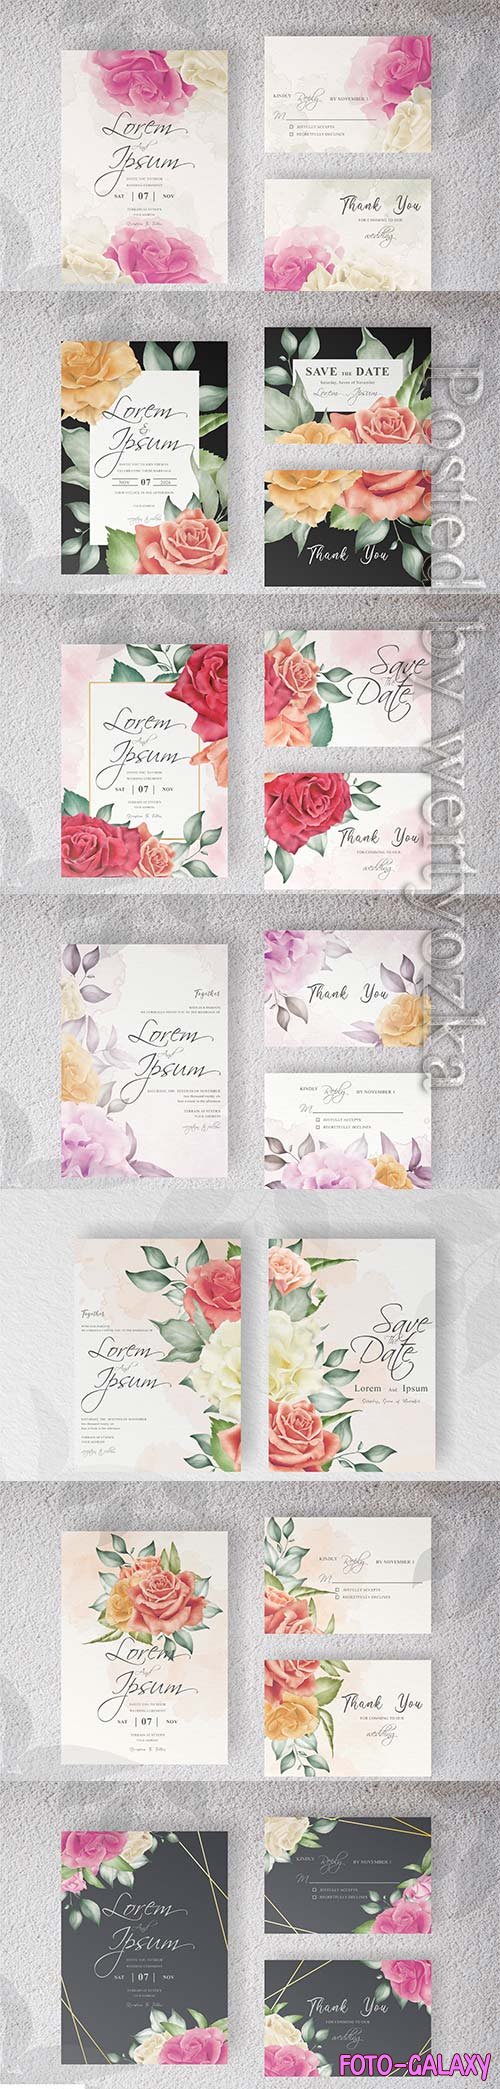 Wedding invitation with beautiful floral and watercolor